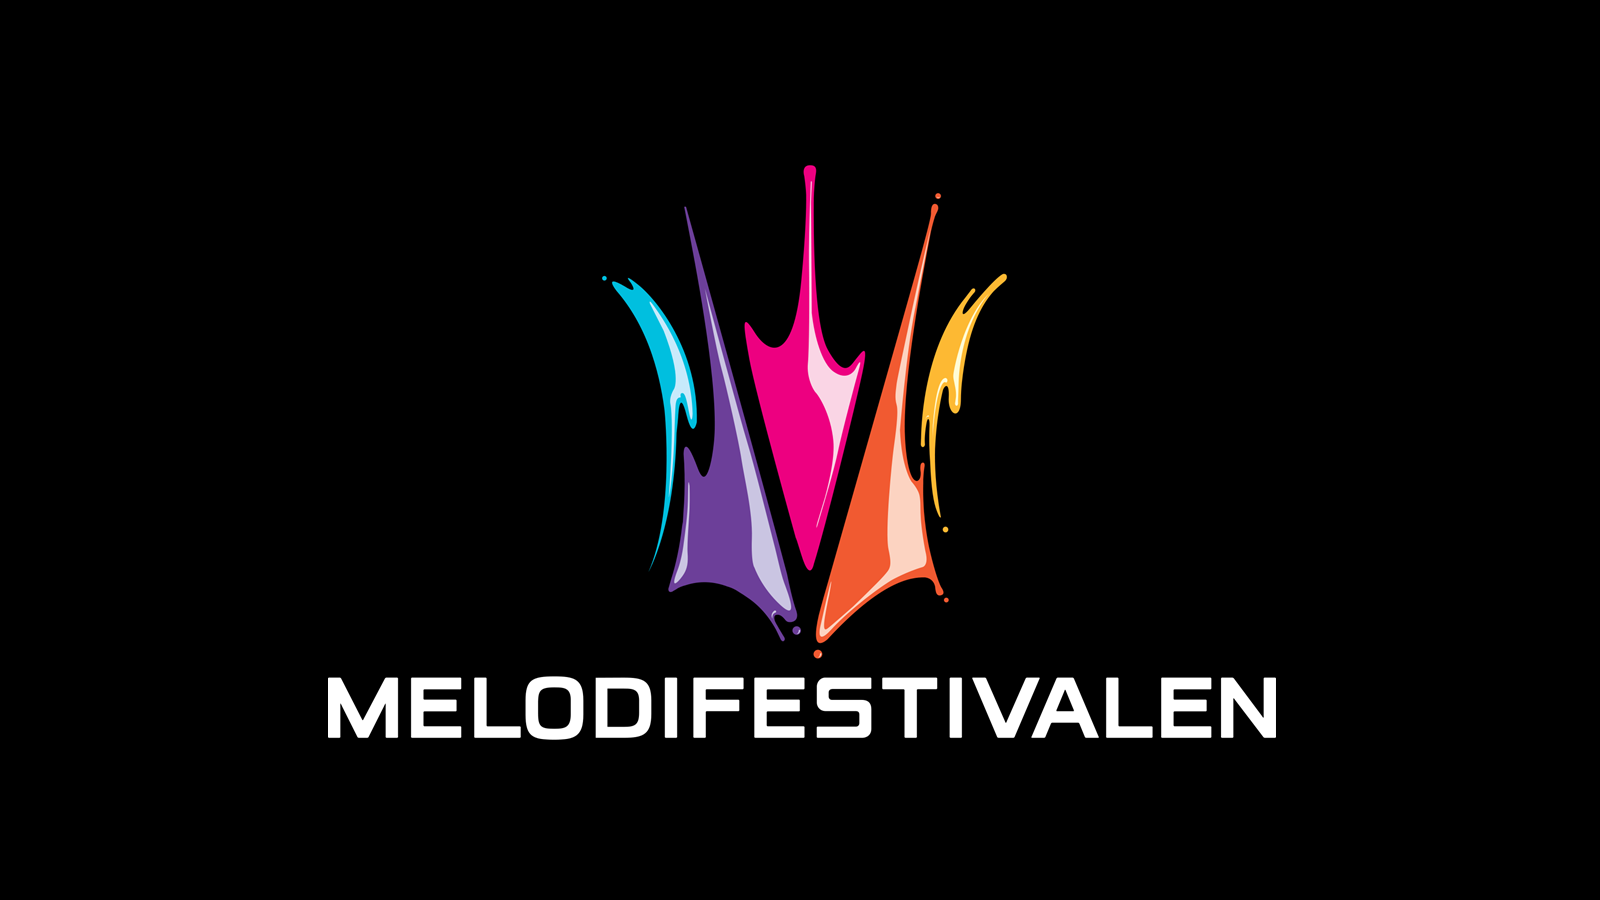 Sweden: Melodifestivalen dates and cities announced